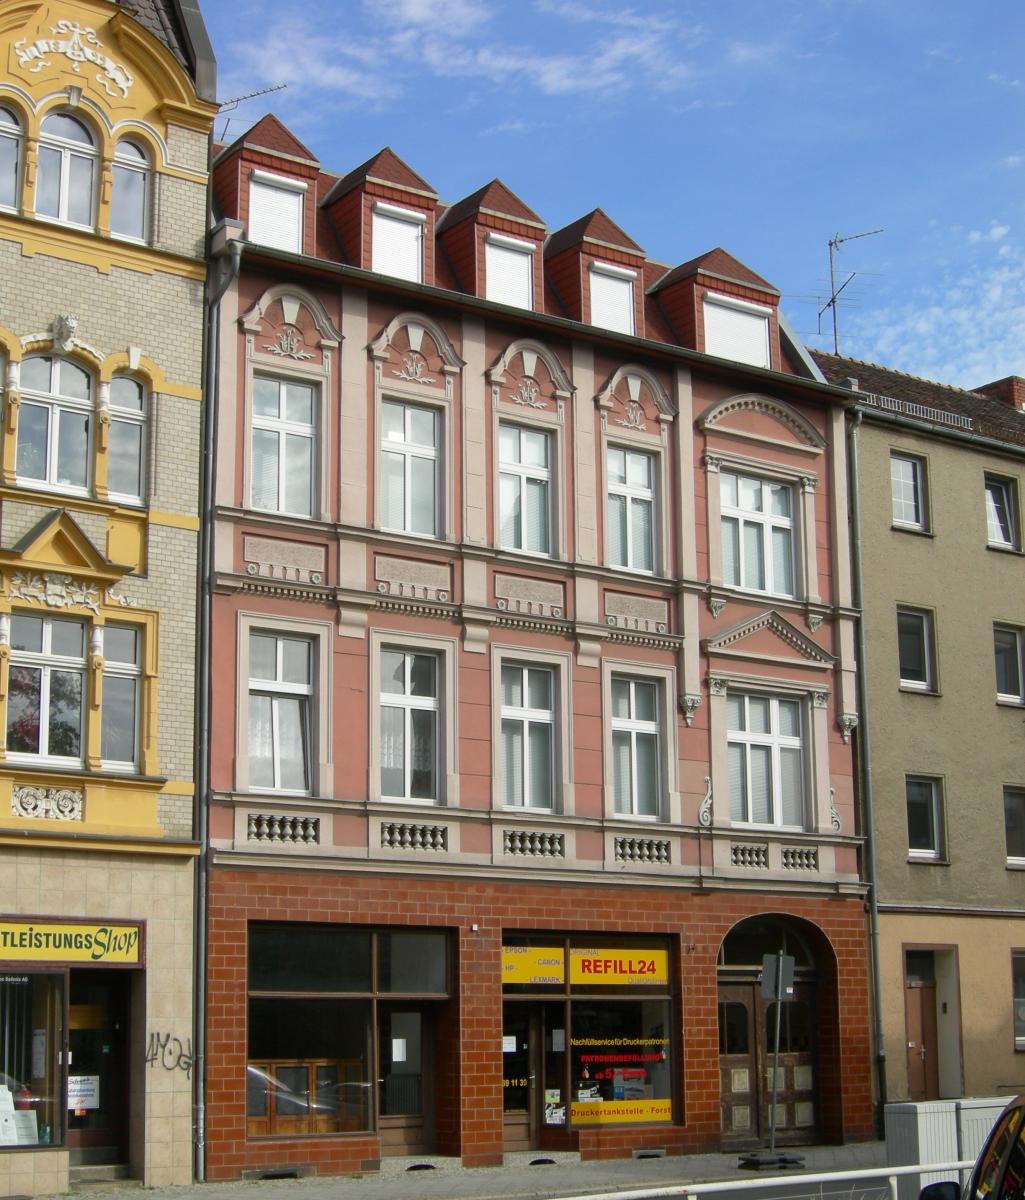 The building in which the Forst Branch met